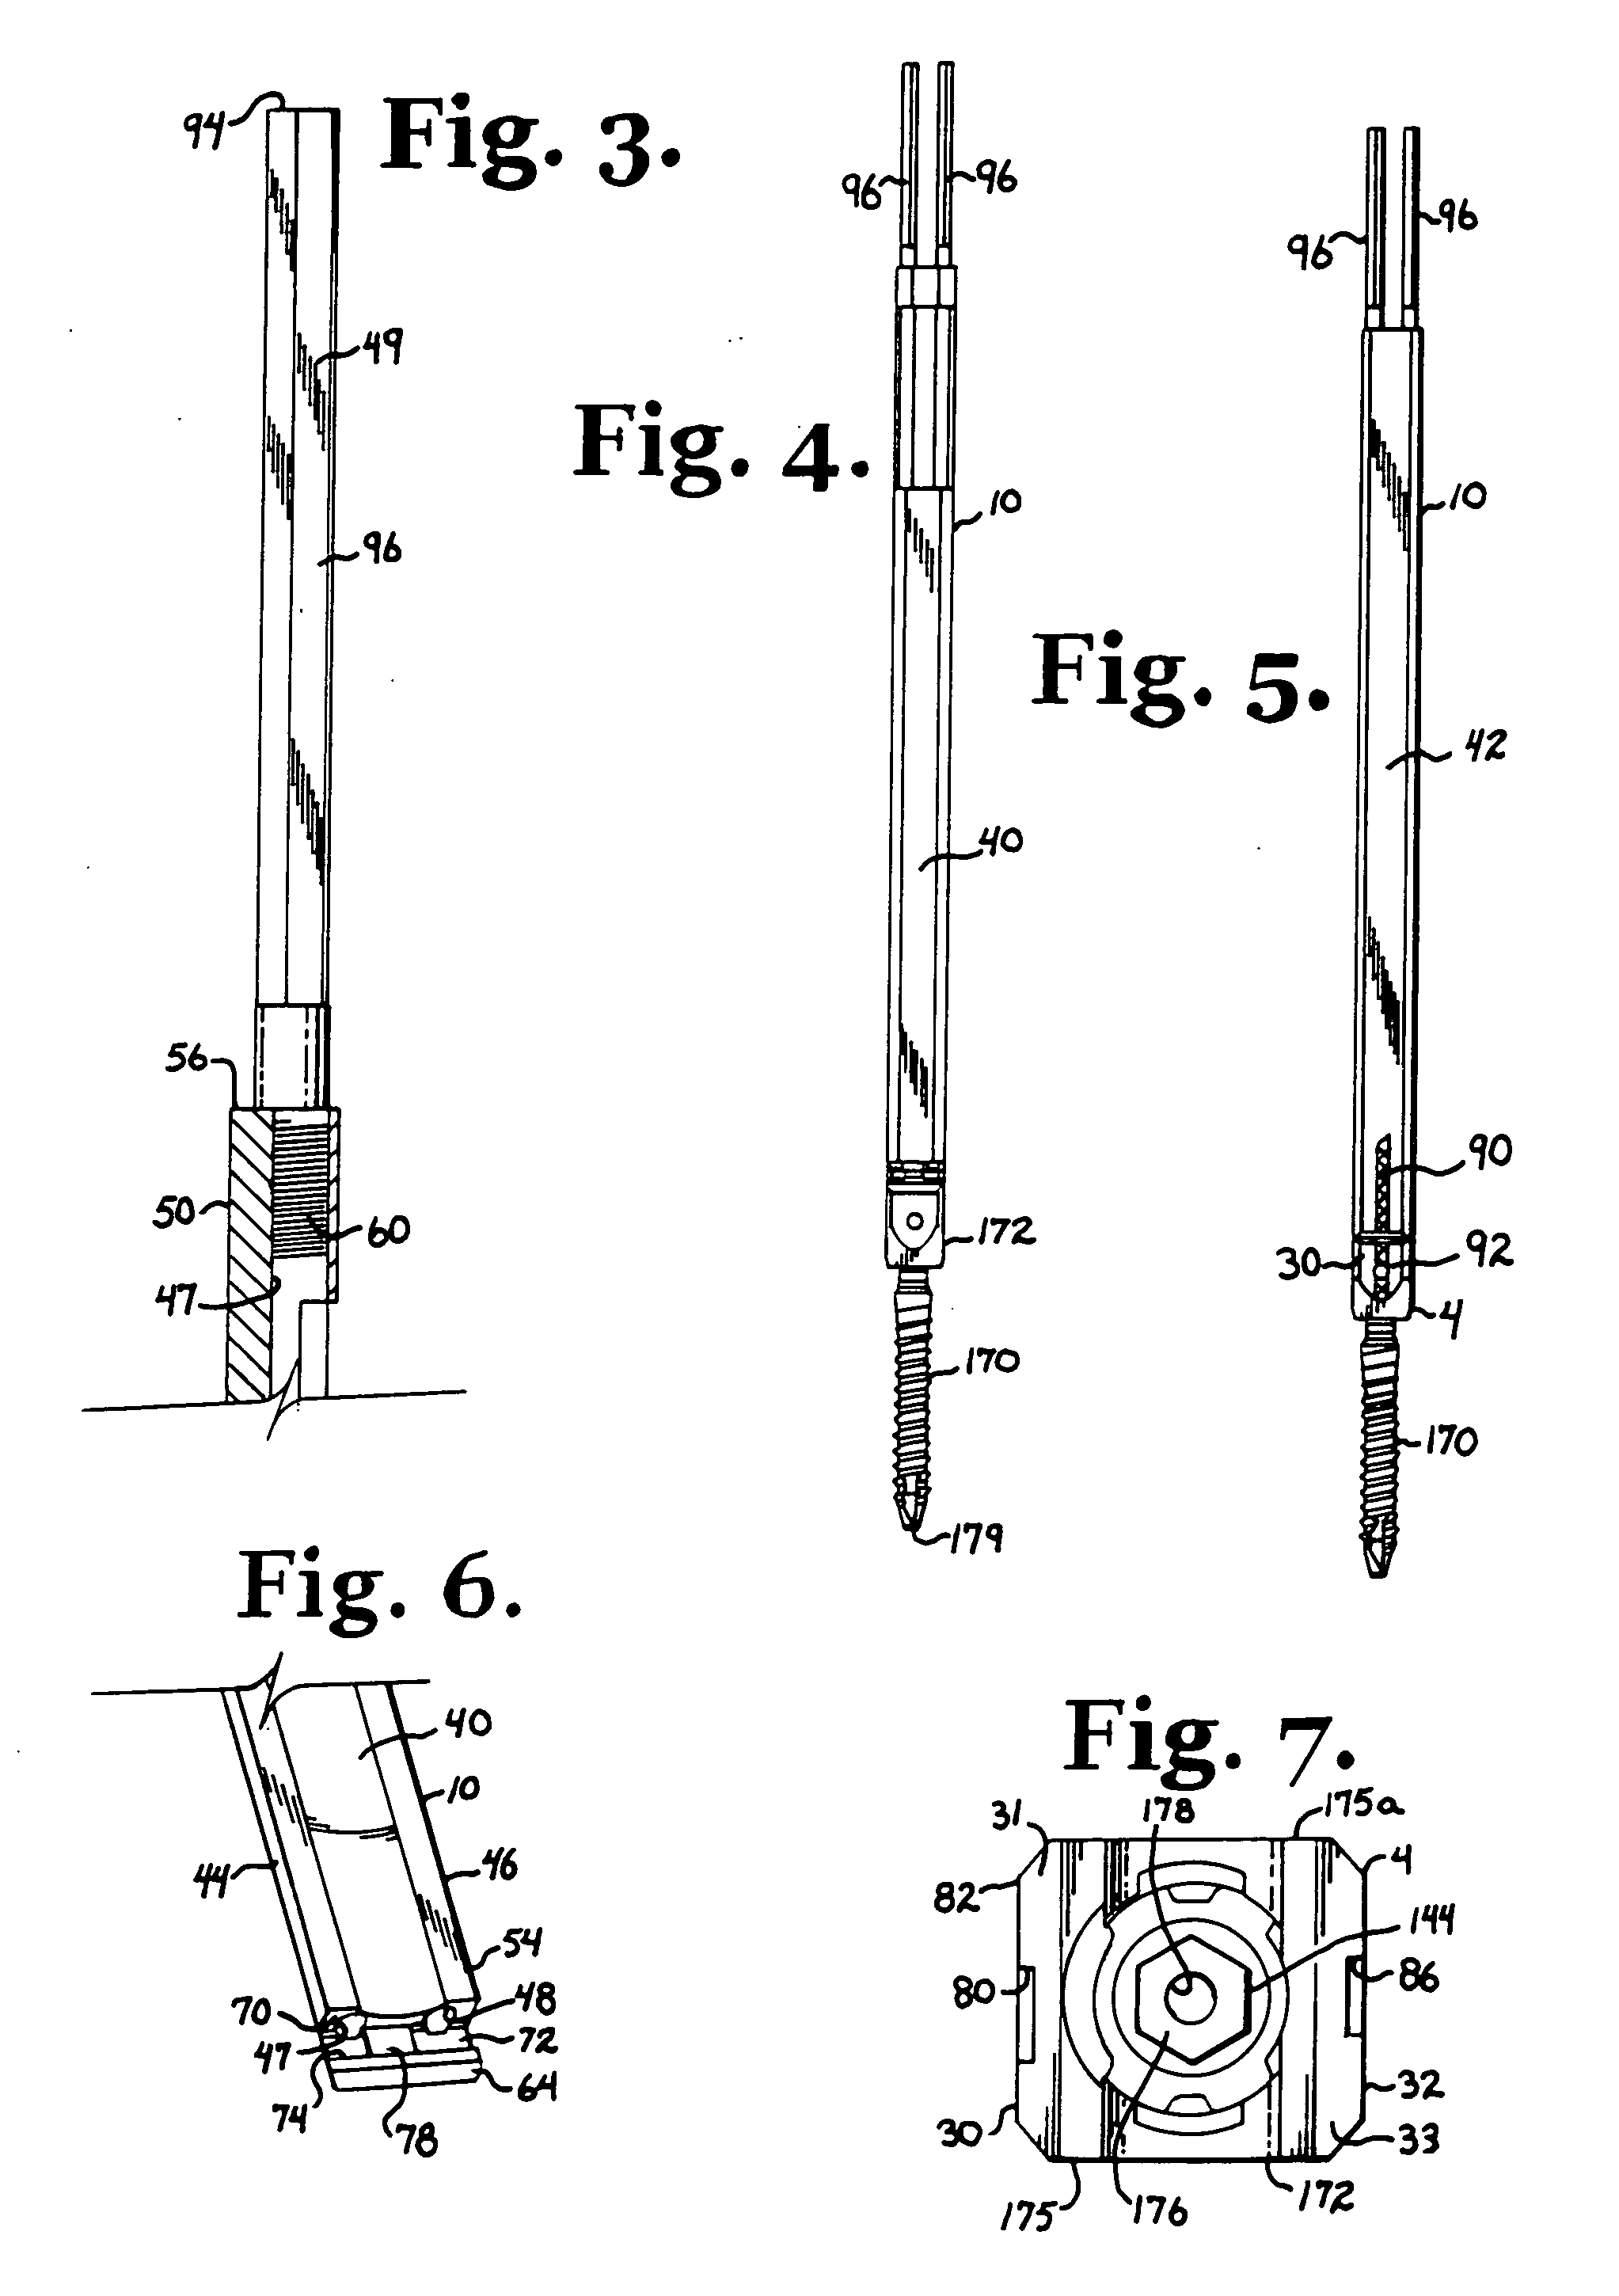 Tool system for dynamic spinal implants